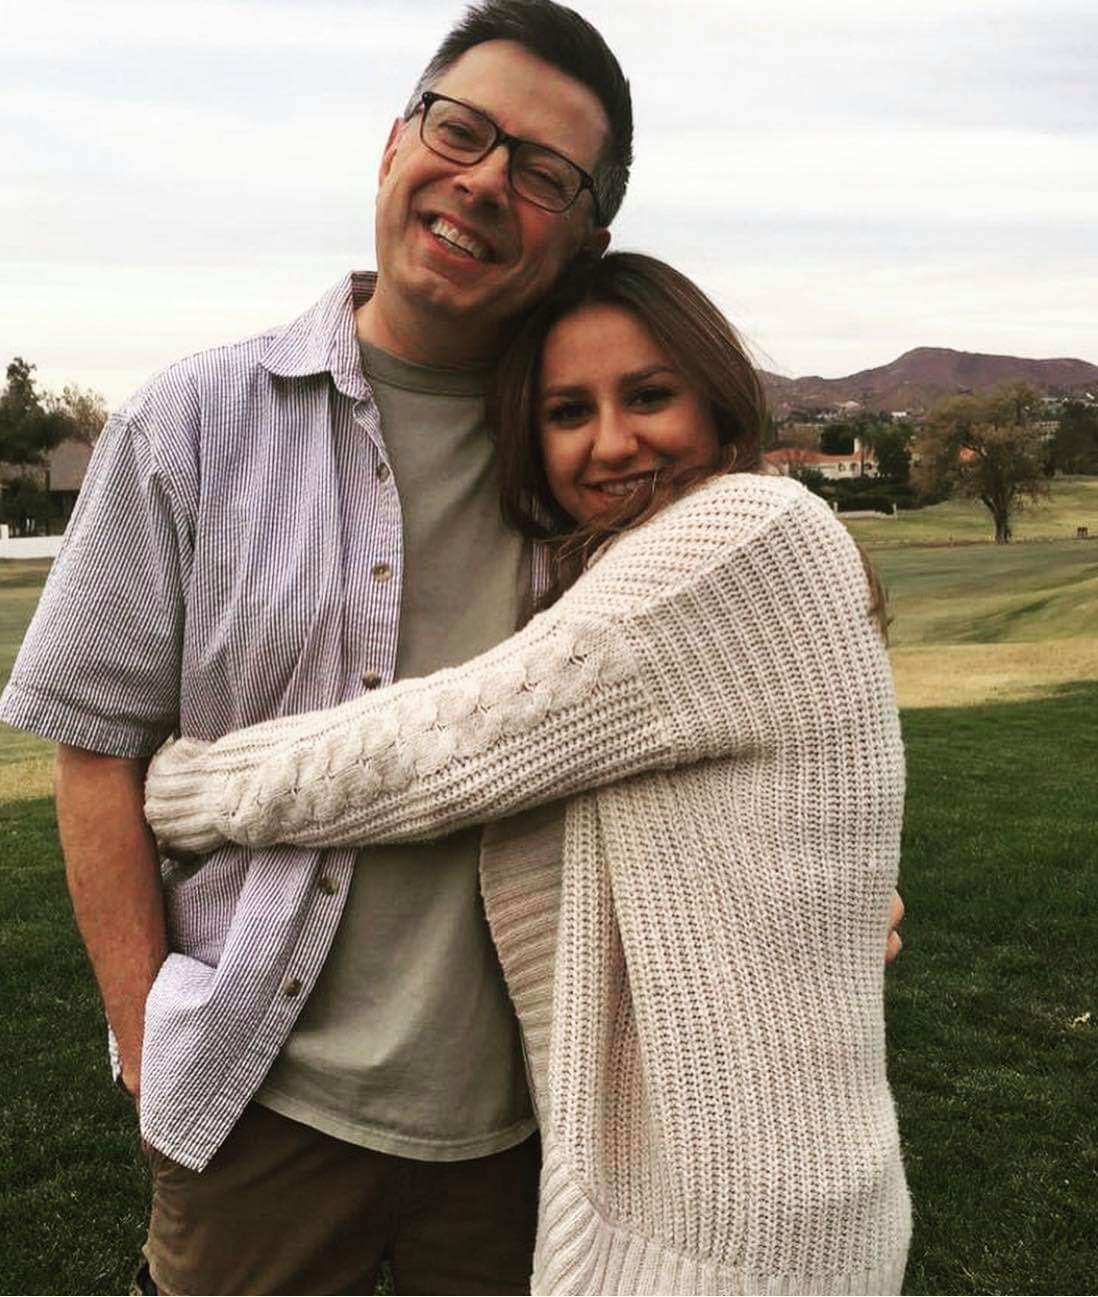 Michael Morisette and his daughter Kristina Morisette pose in this undated photo. Kristina Morisette, 20, was one of 12 people killed in the Borderline Bar & Grill mass shooting on Nov. 7, 2018, in Thousand Oaks.